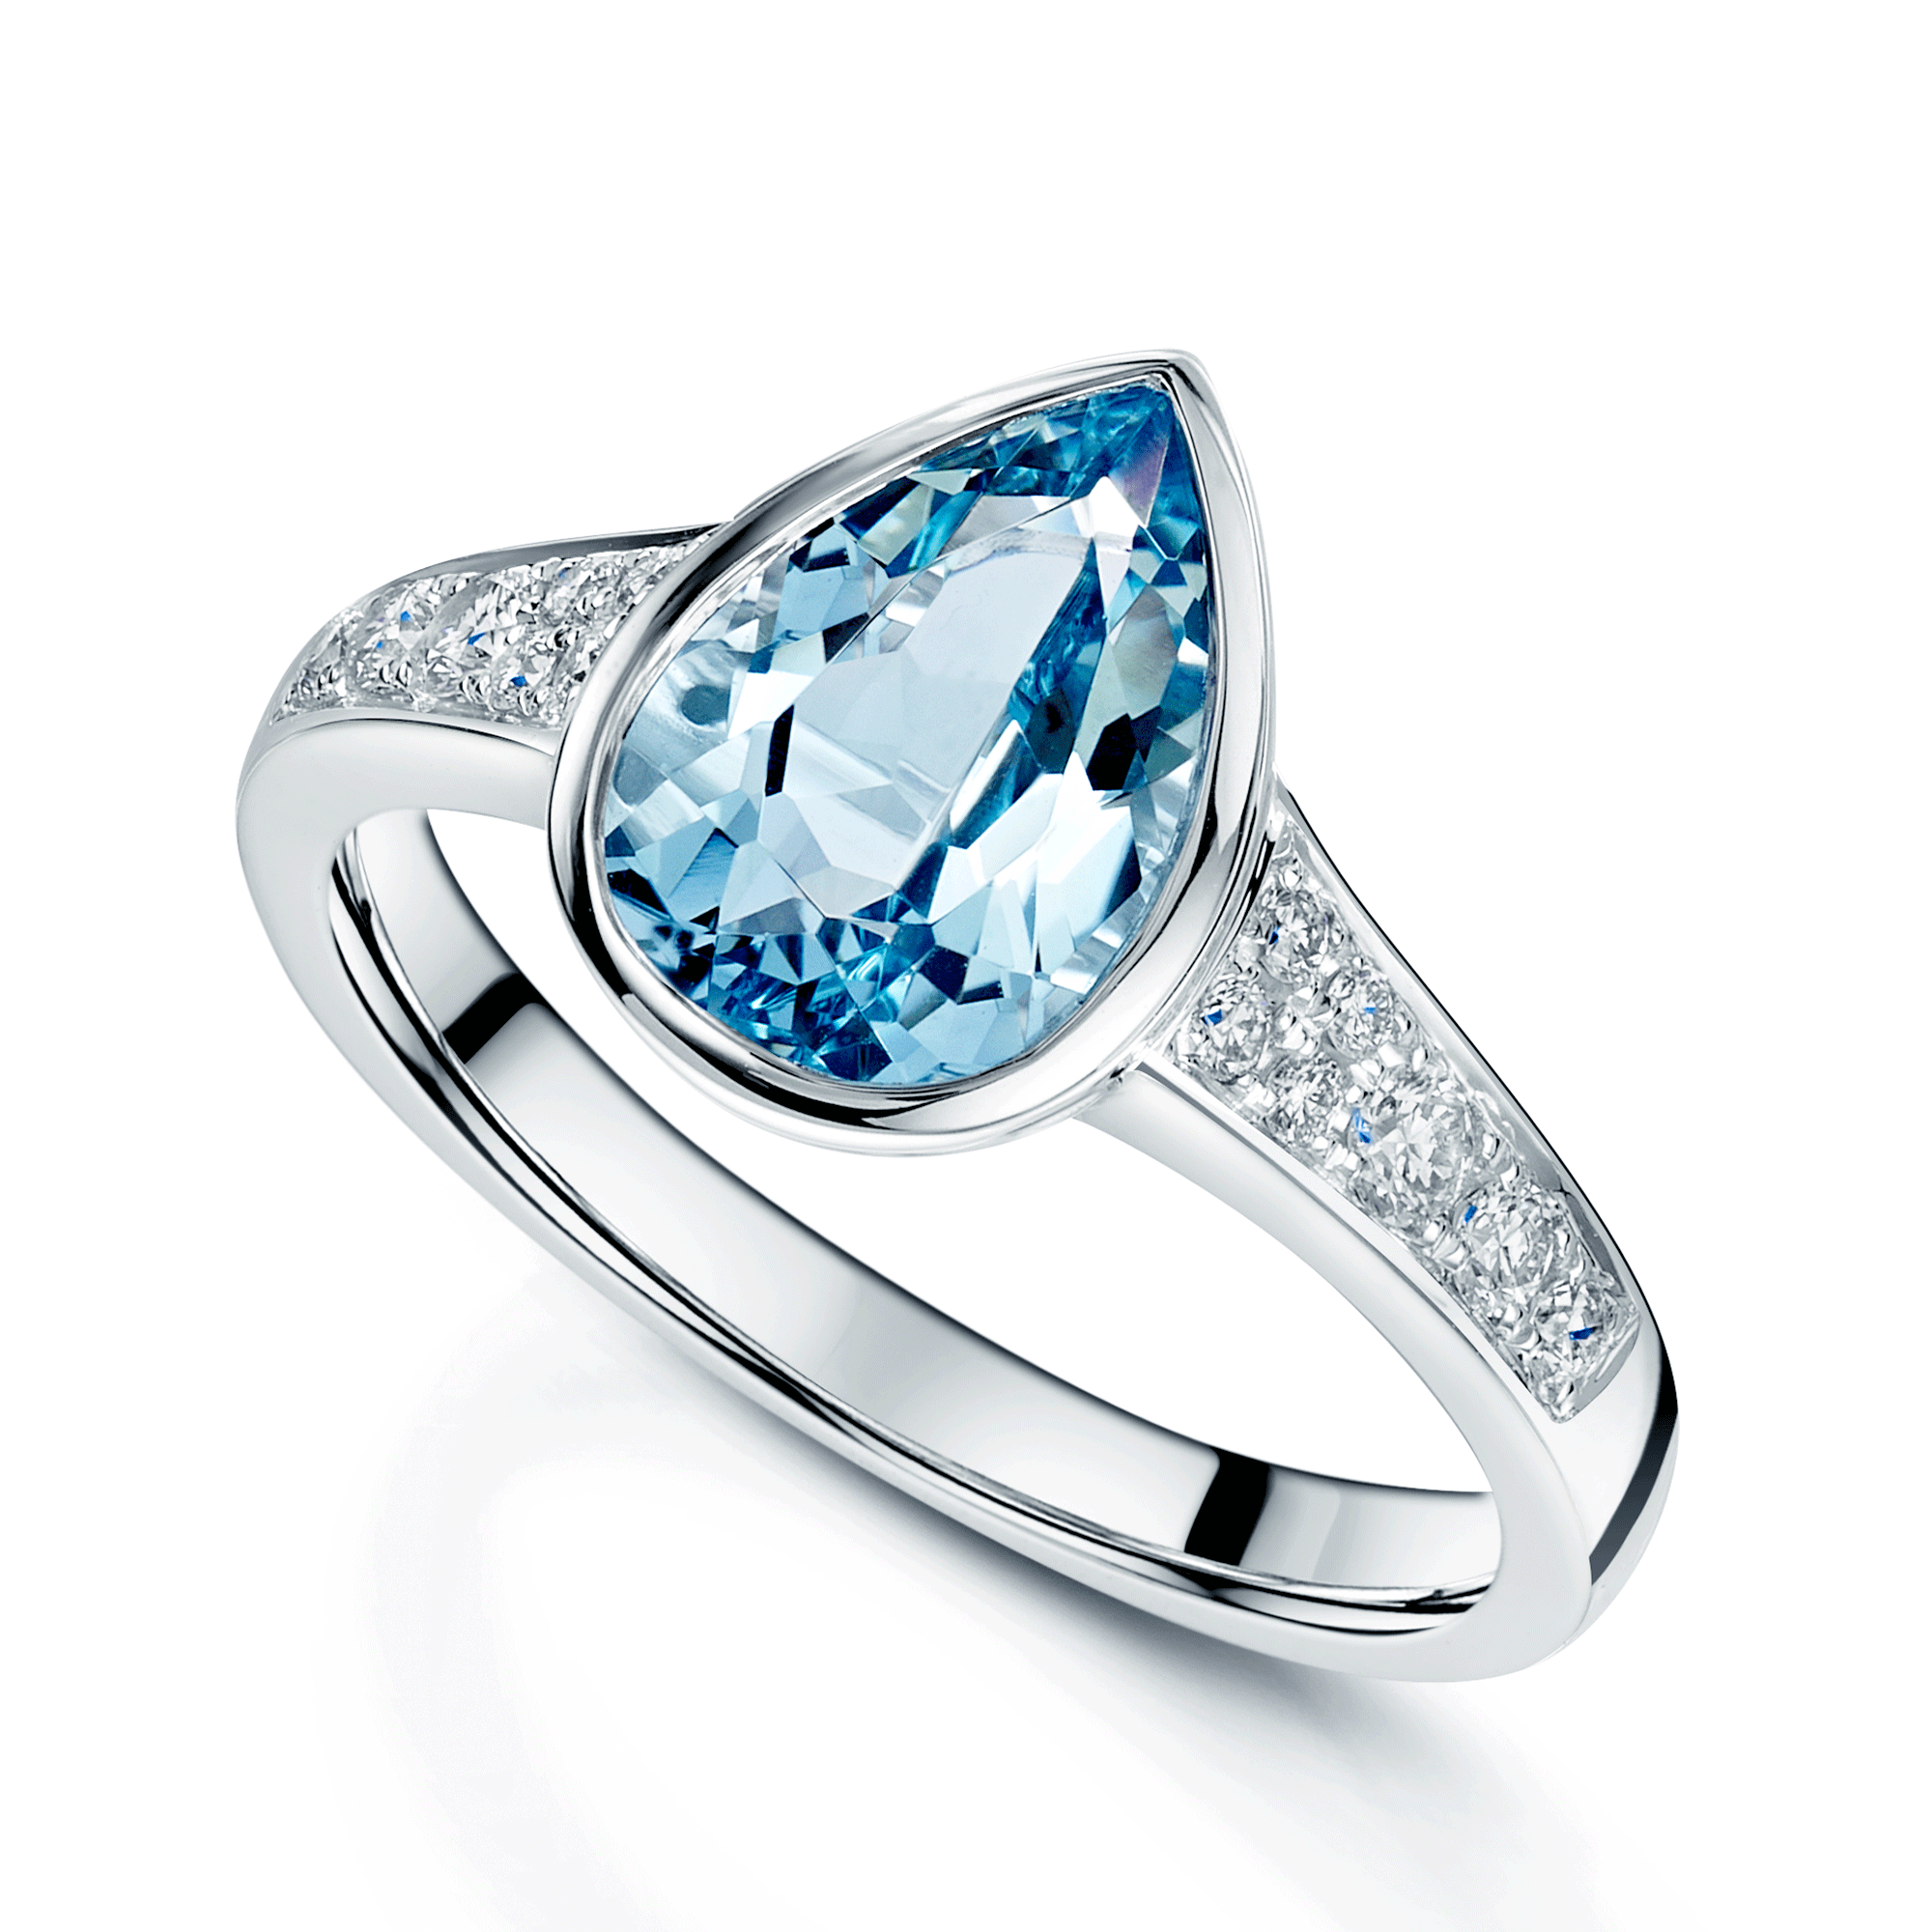 18ct White Gold Pear Cut Aquamarine Ring With Diamond Set Shoulders